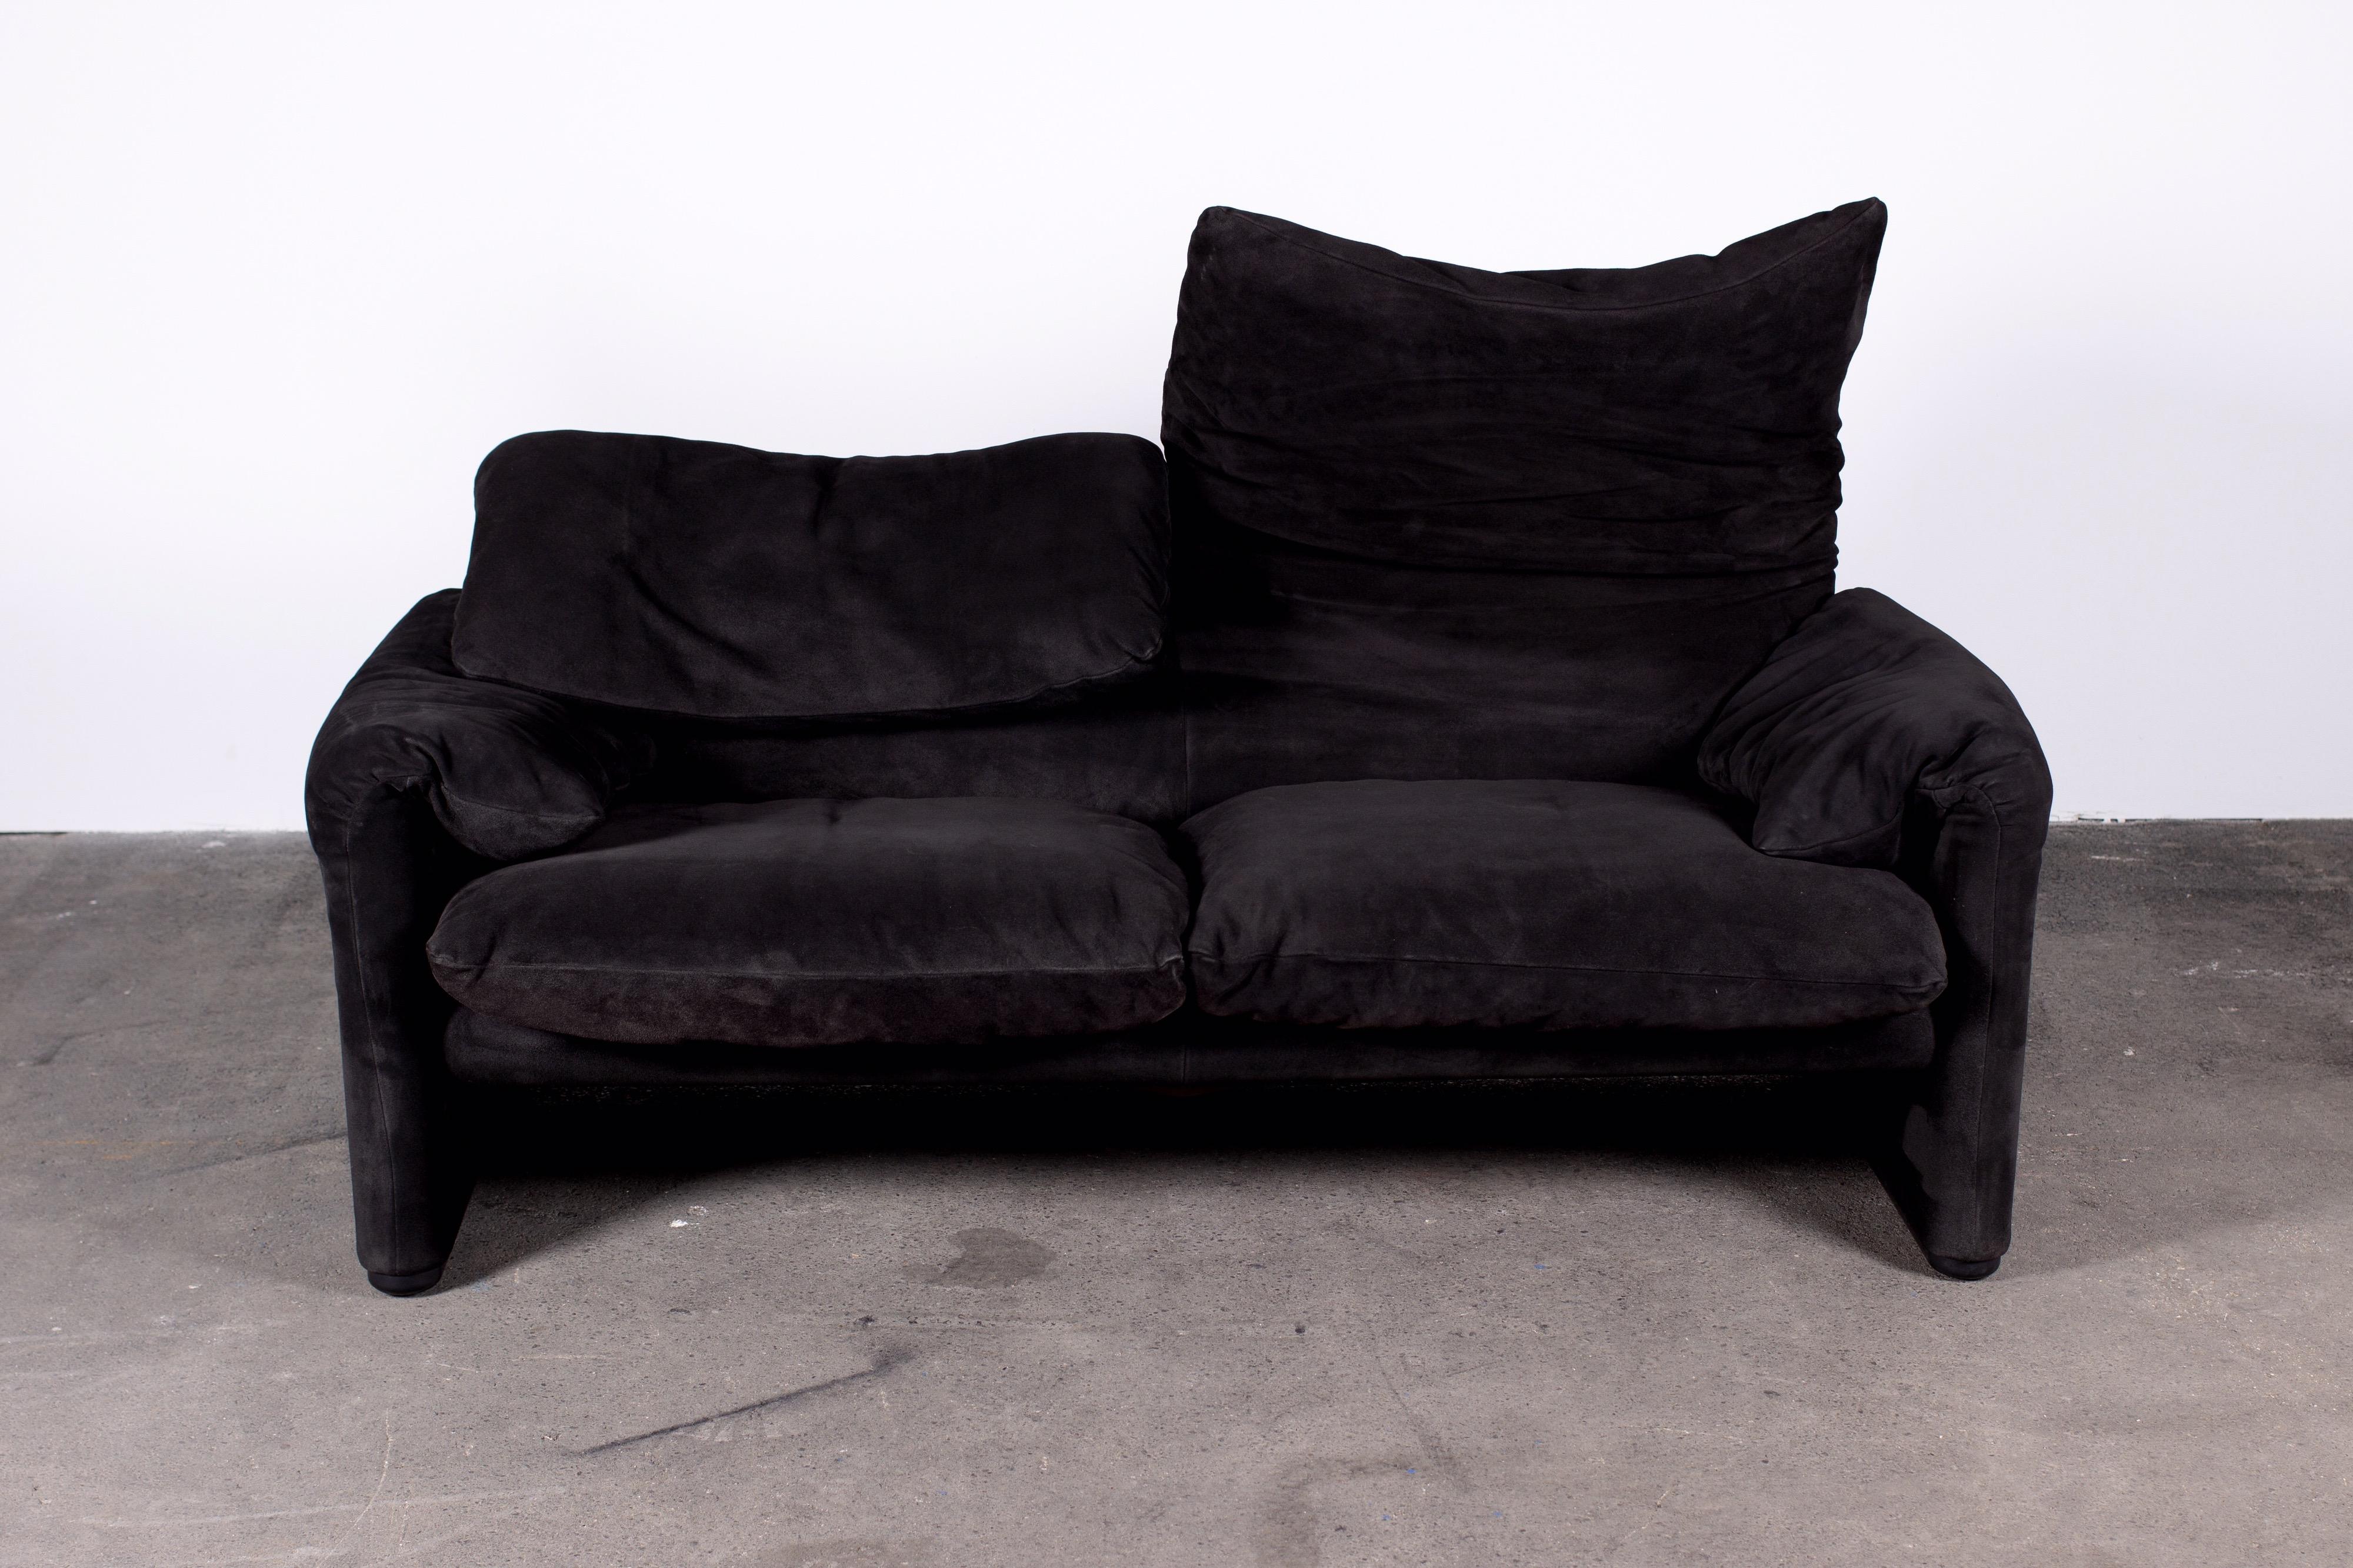 Pair of Black Suede 2-Seater Maralunga Sofas by Vico Magistretti for Cassina 7